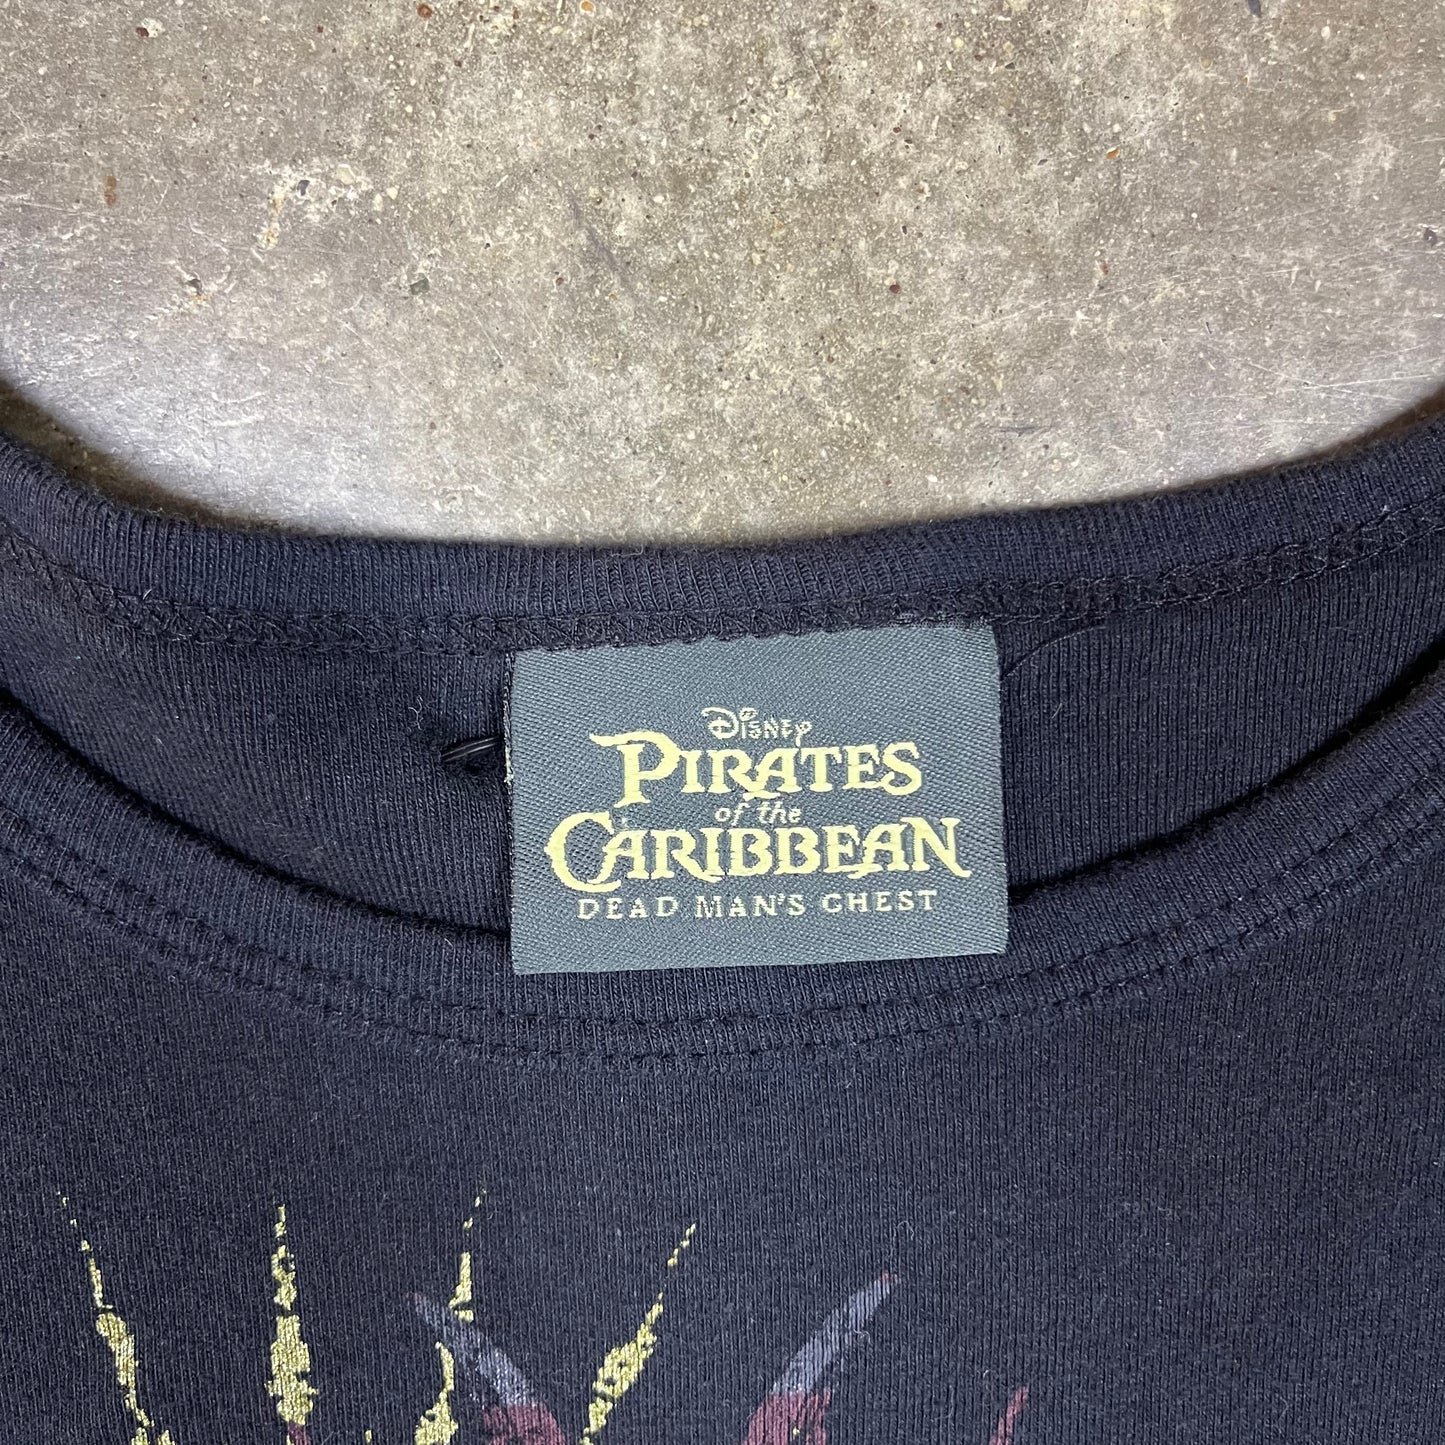 M 00s Pirates of the Caribbean Tee